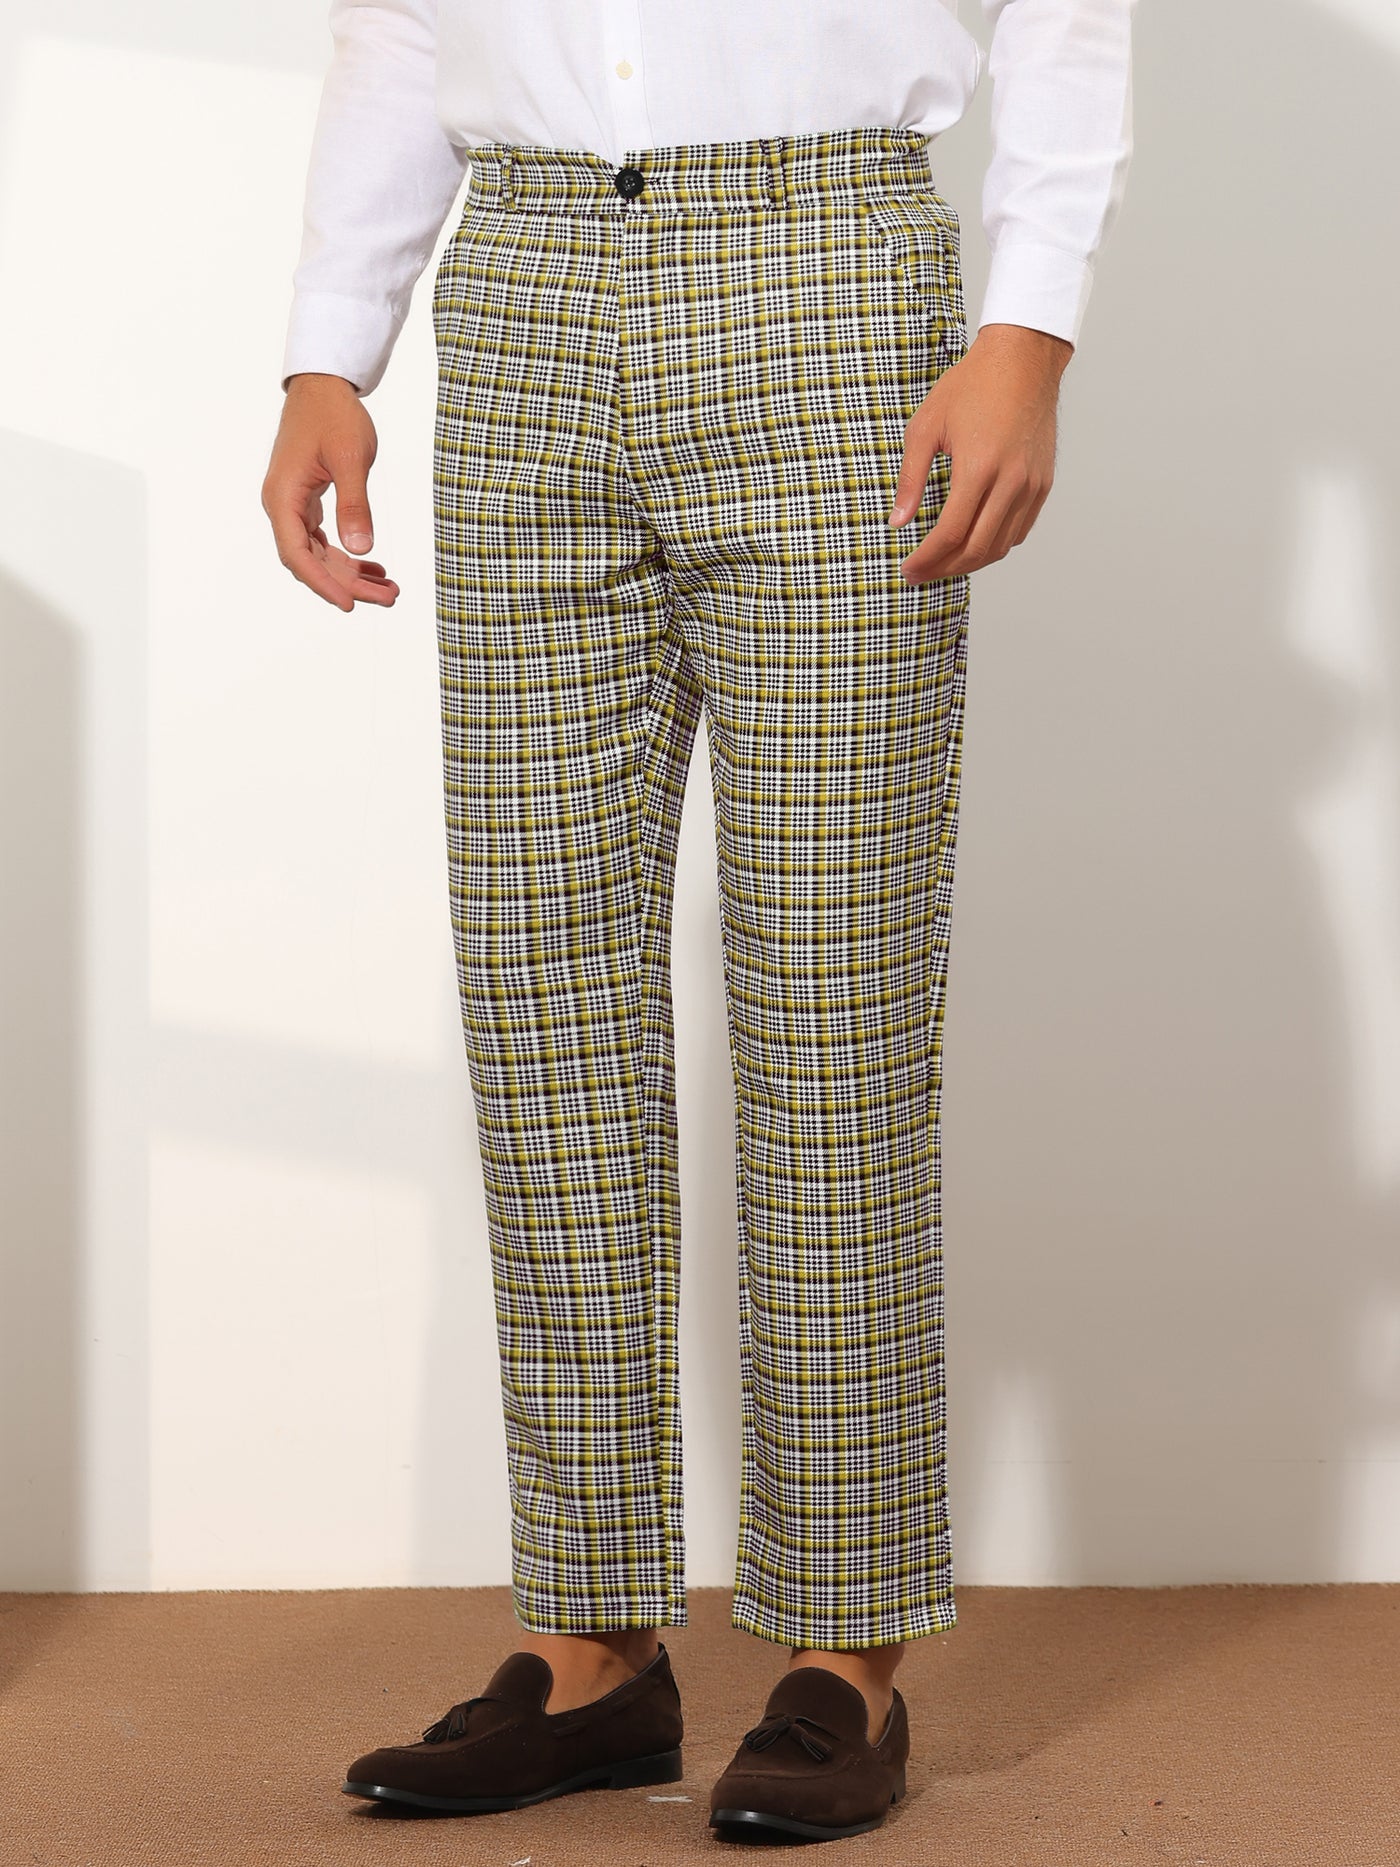 Bublédon Houndstooth Dress Pants for Men's Straight Fit Lightweight Plaid Checked Trousers